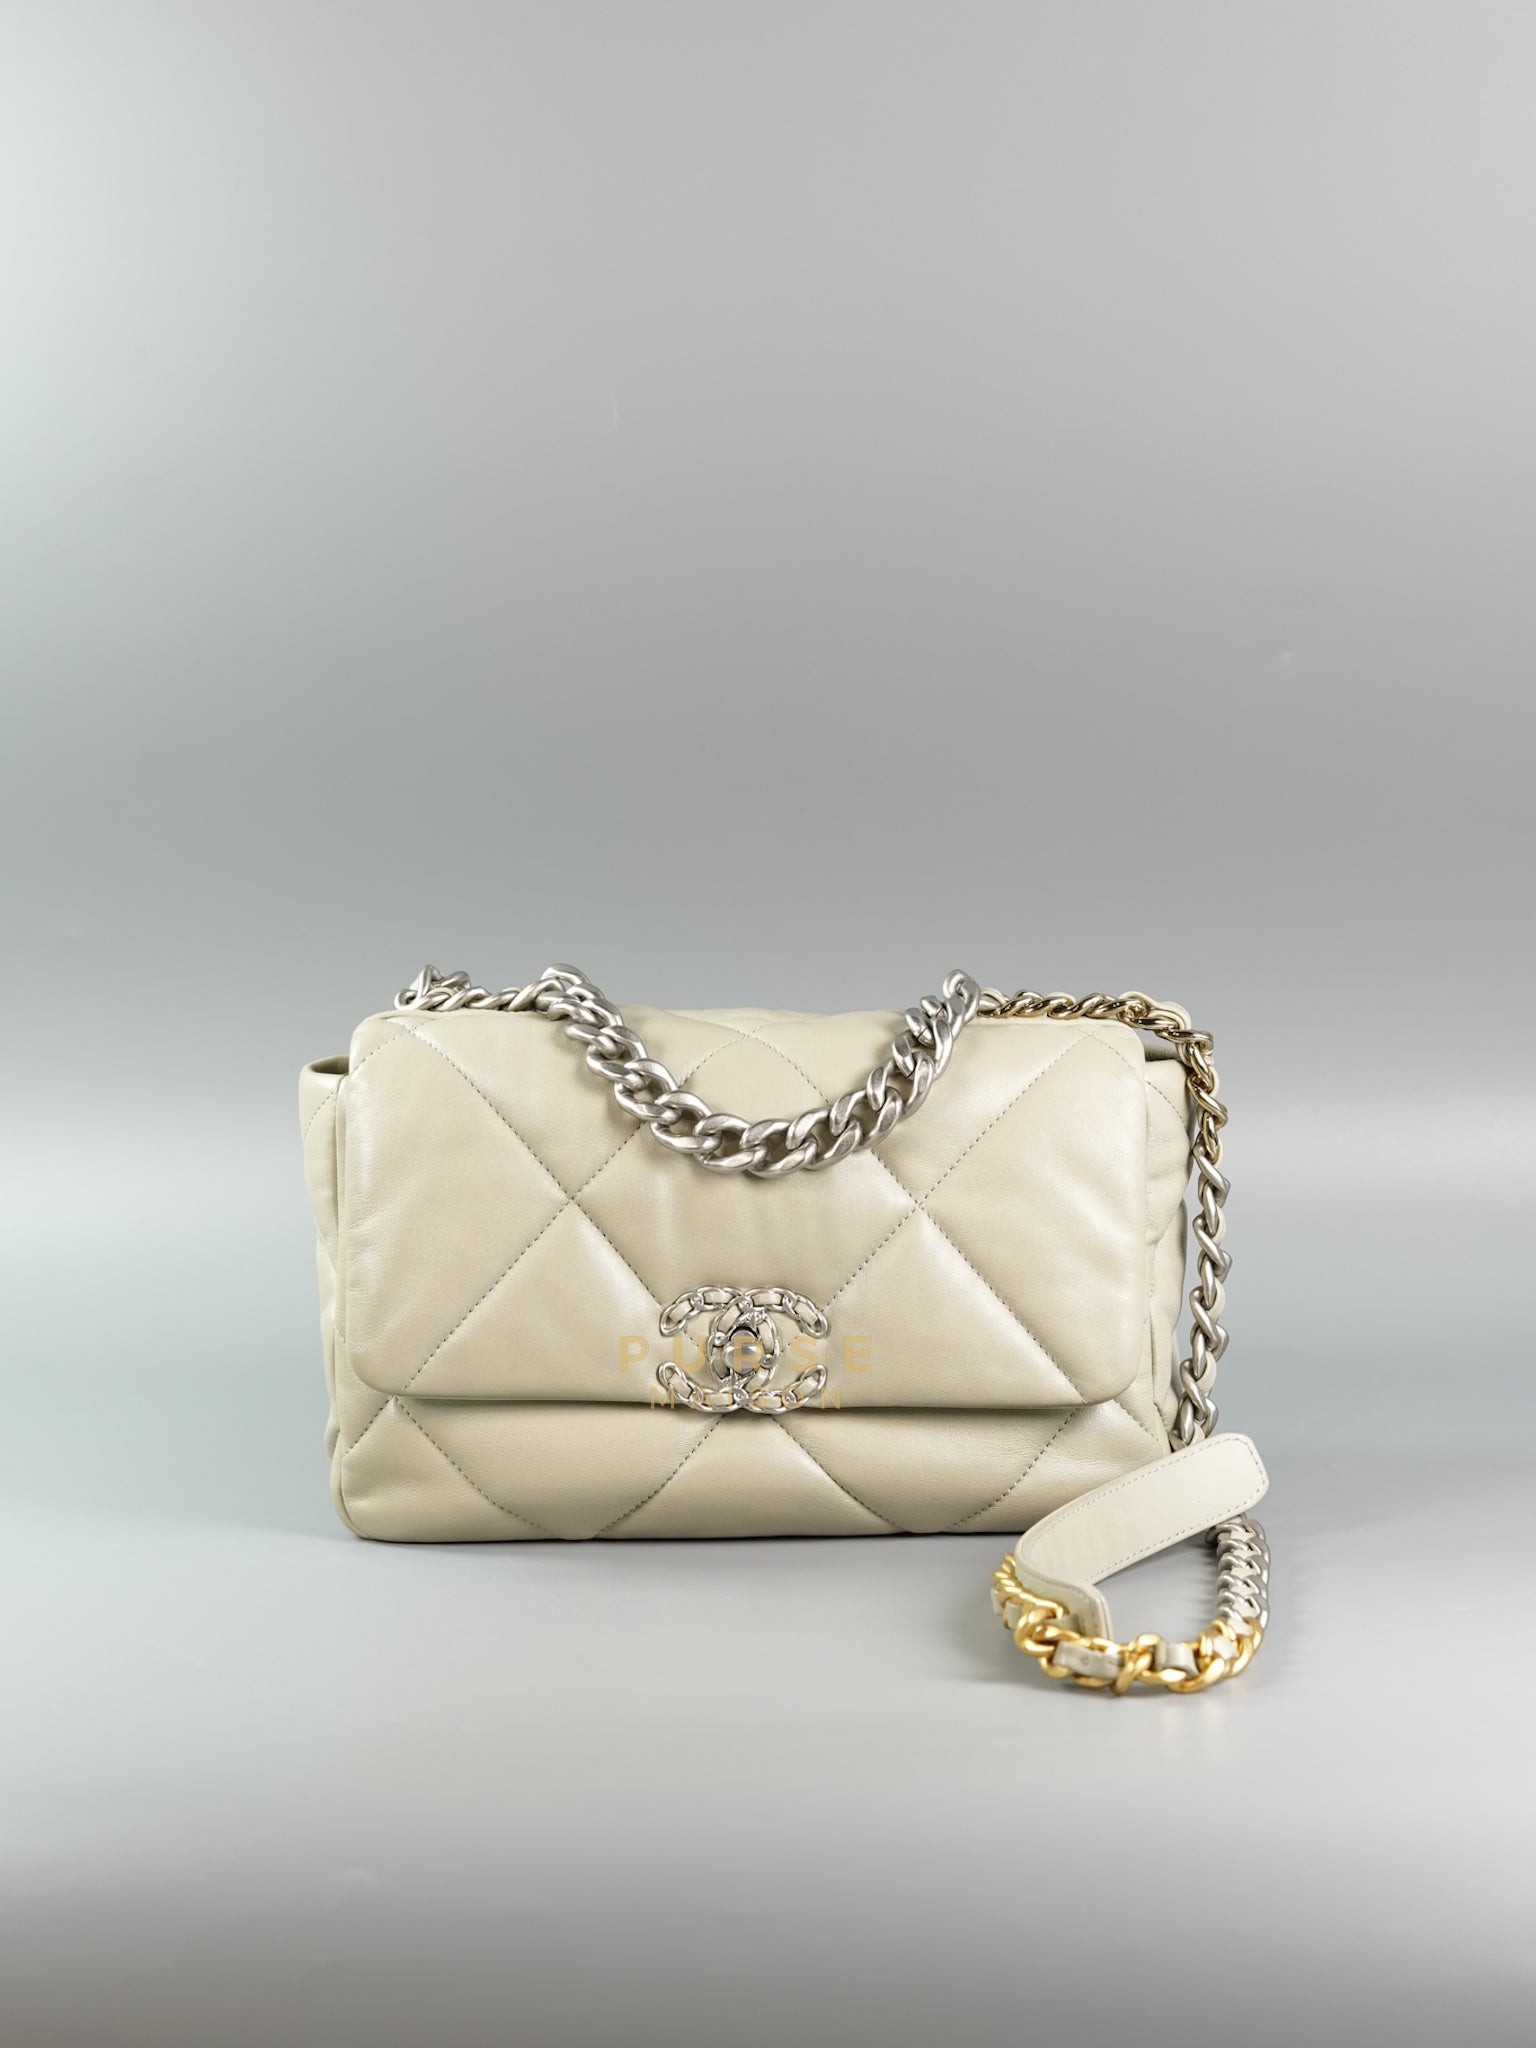 19 Small in Light Gray Lambskin Leather & Mixed Hardware (Microchip) | Purse Maison Luxury Bags Shop